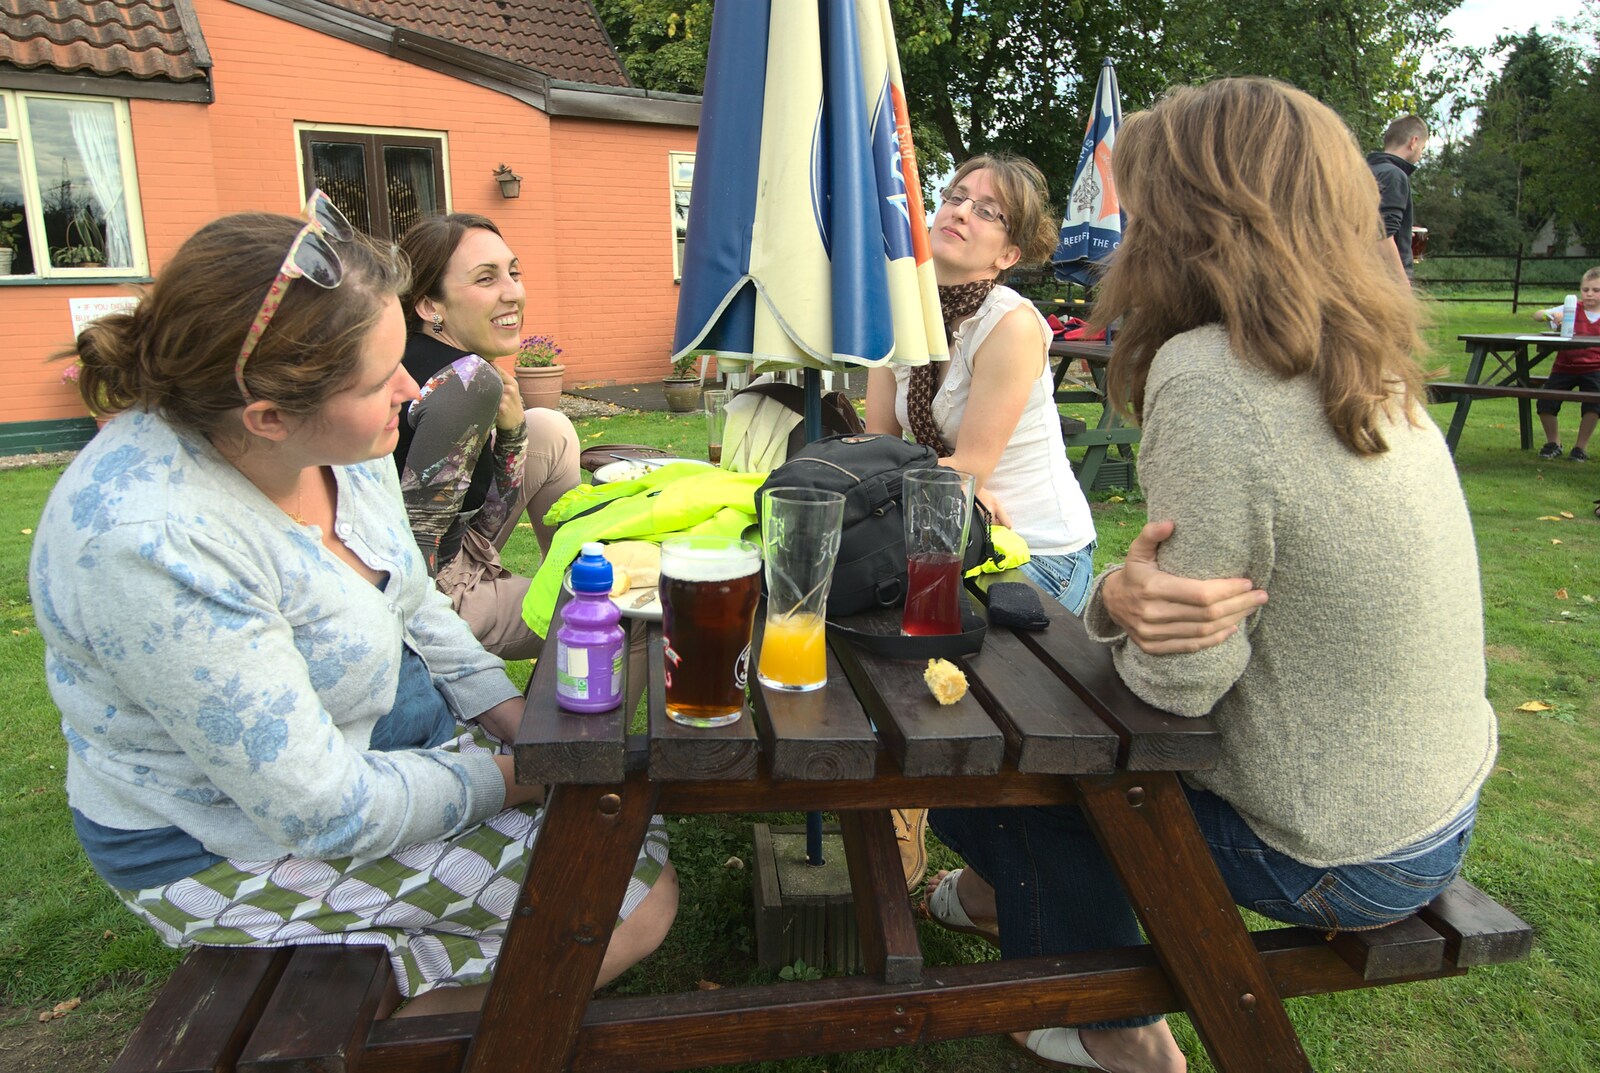 Isobel, Carmen, Suey and Martina from Barbeque at the Swan Inn, Brome, Suffolk - 5th August 2011